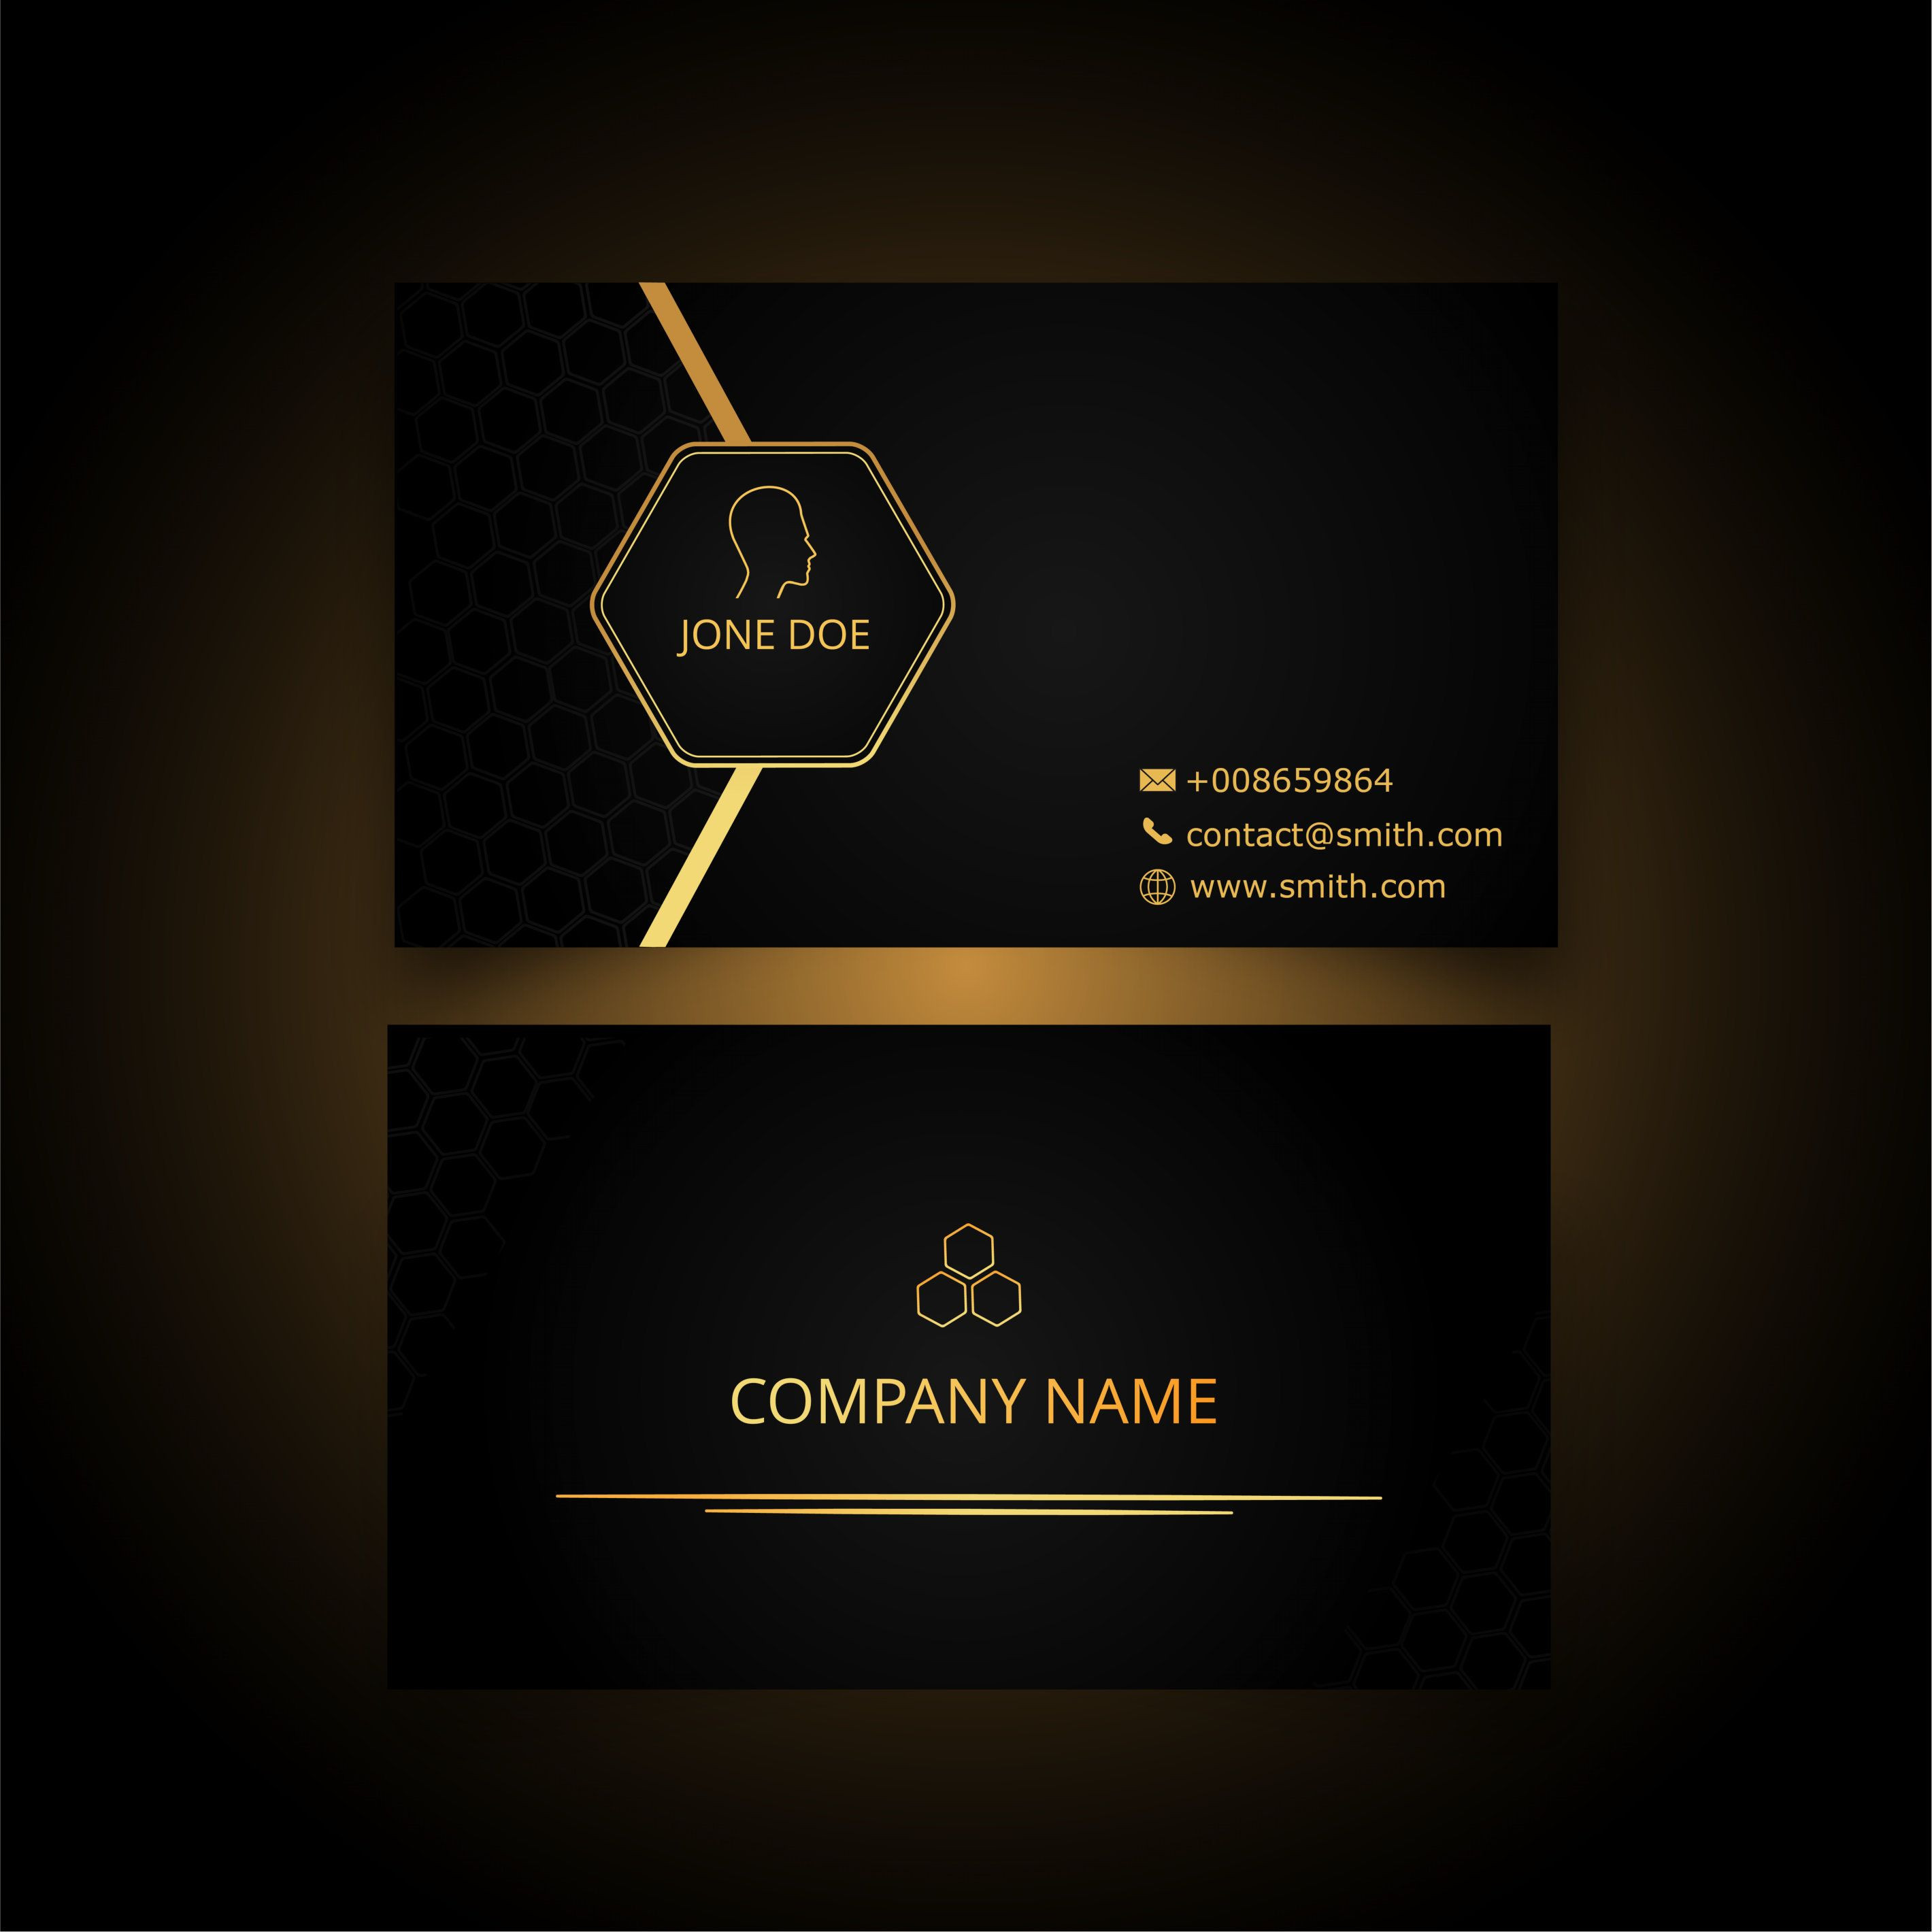 Modern Business Card Template Available On Freepik Of Free Online Business Card Templates